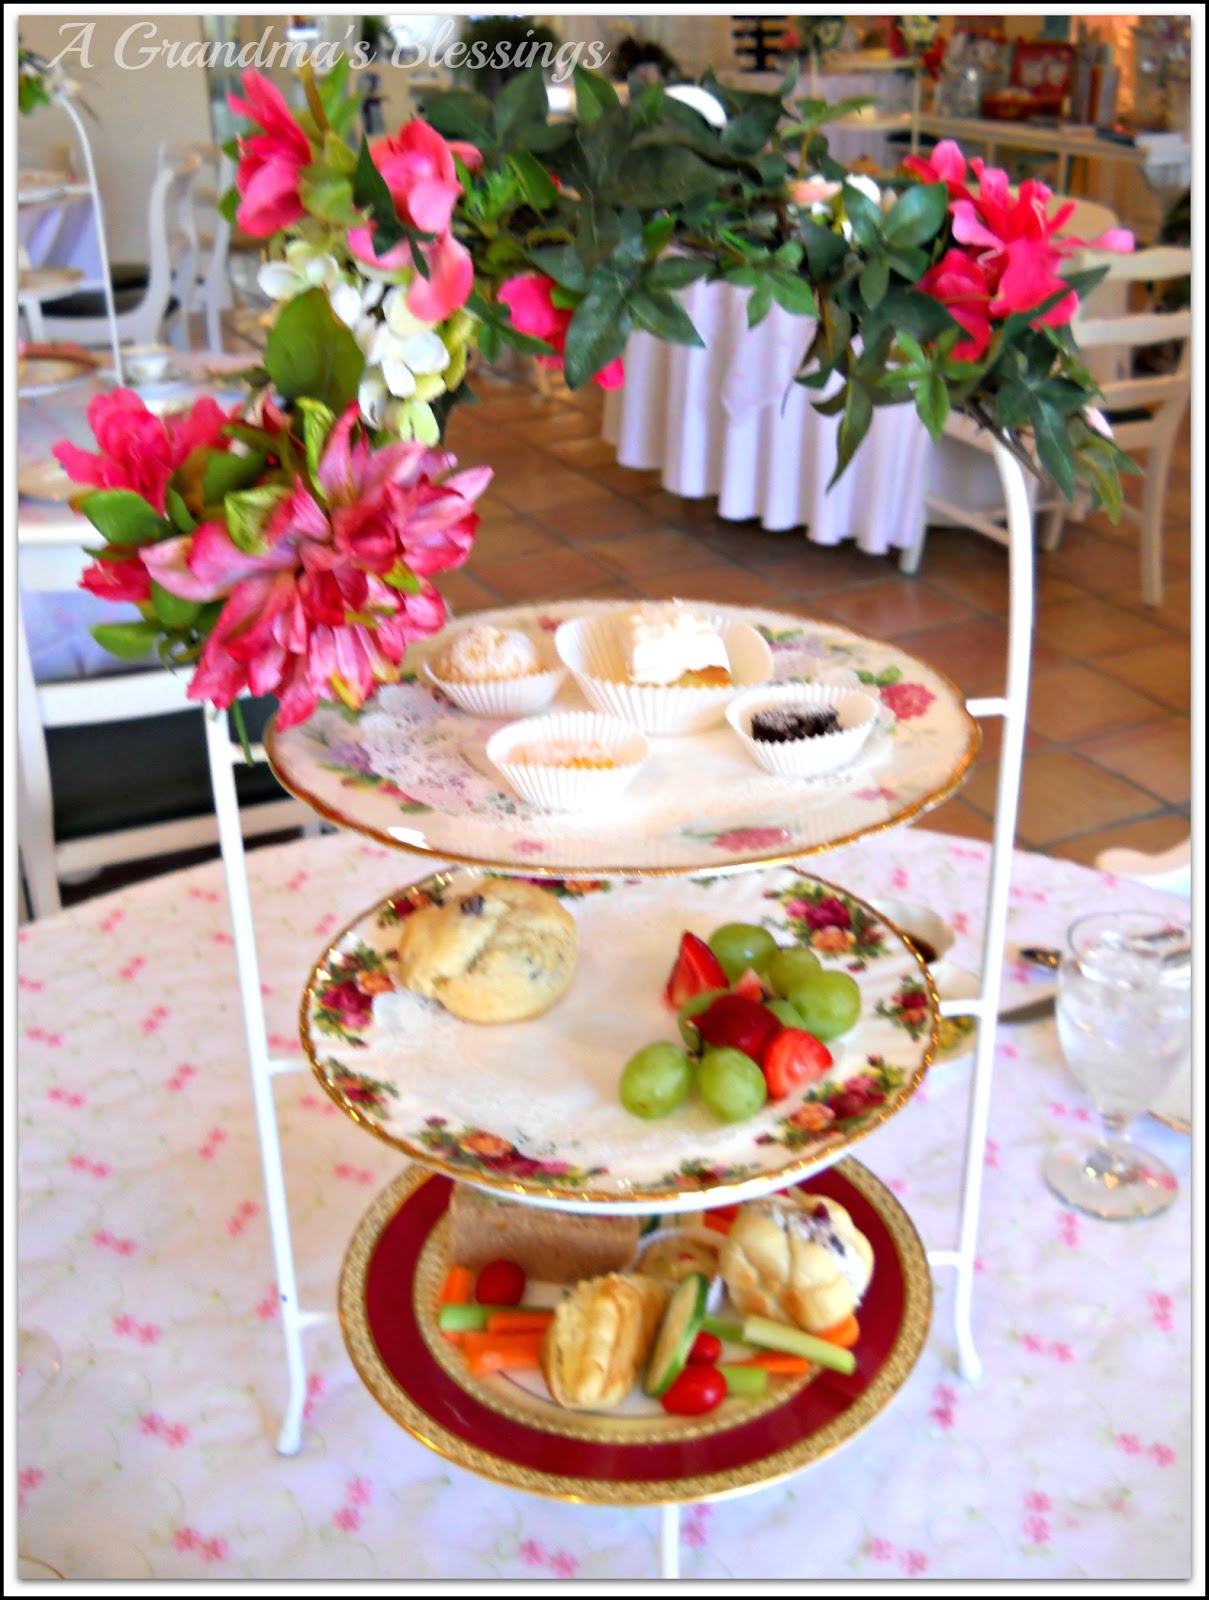 A Grandma's Blessings: Madison Tea Room and Gardens